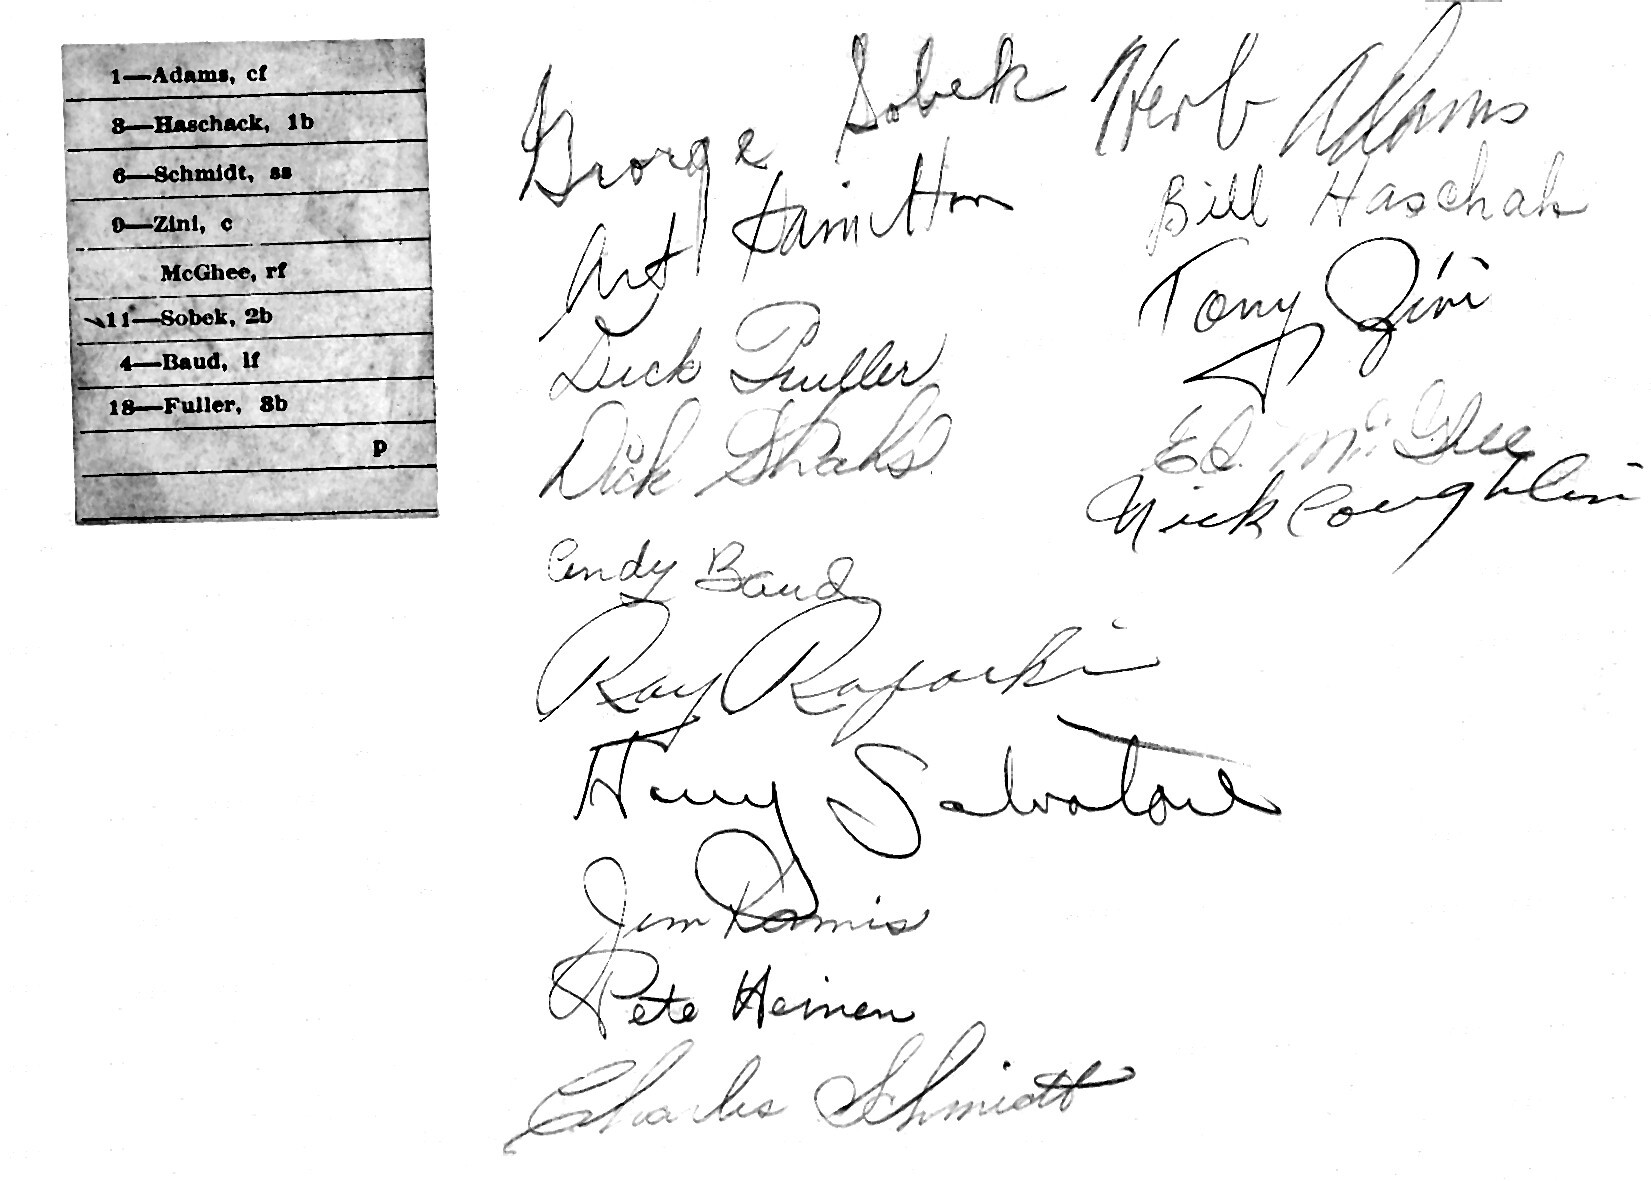 Back of team photo of the Hot Springs Bathers  signed by players, 1948